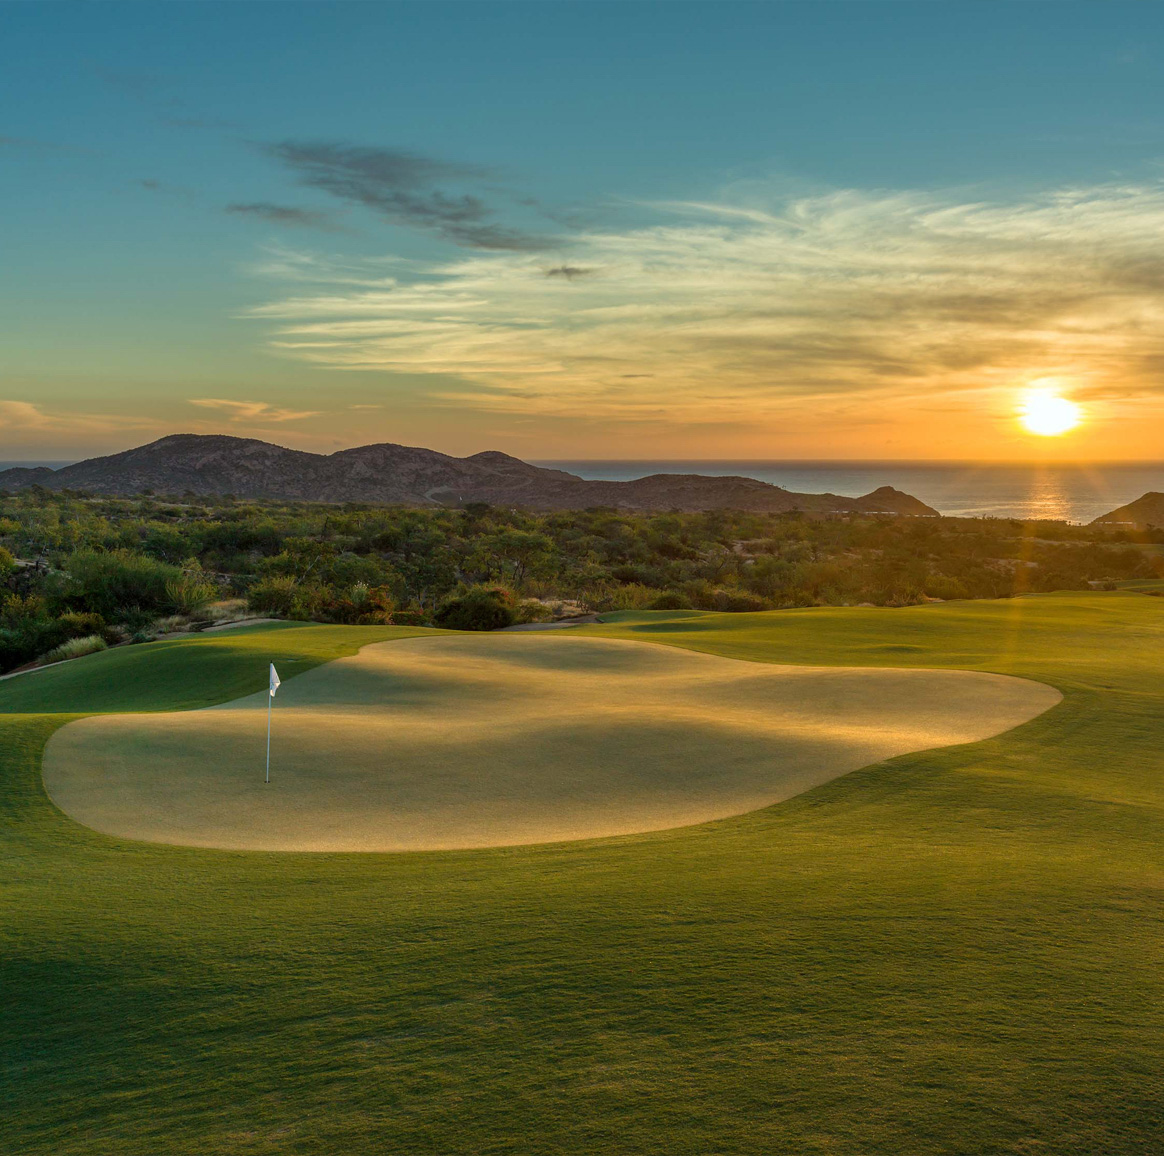 sunset over a putting green at maravilla los cabos golf course